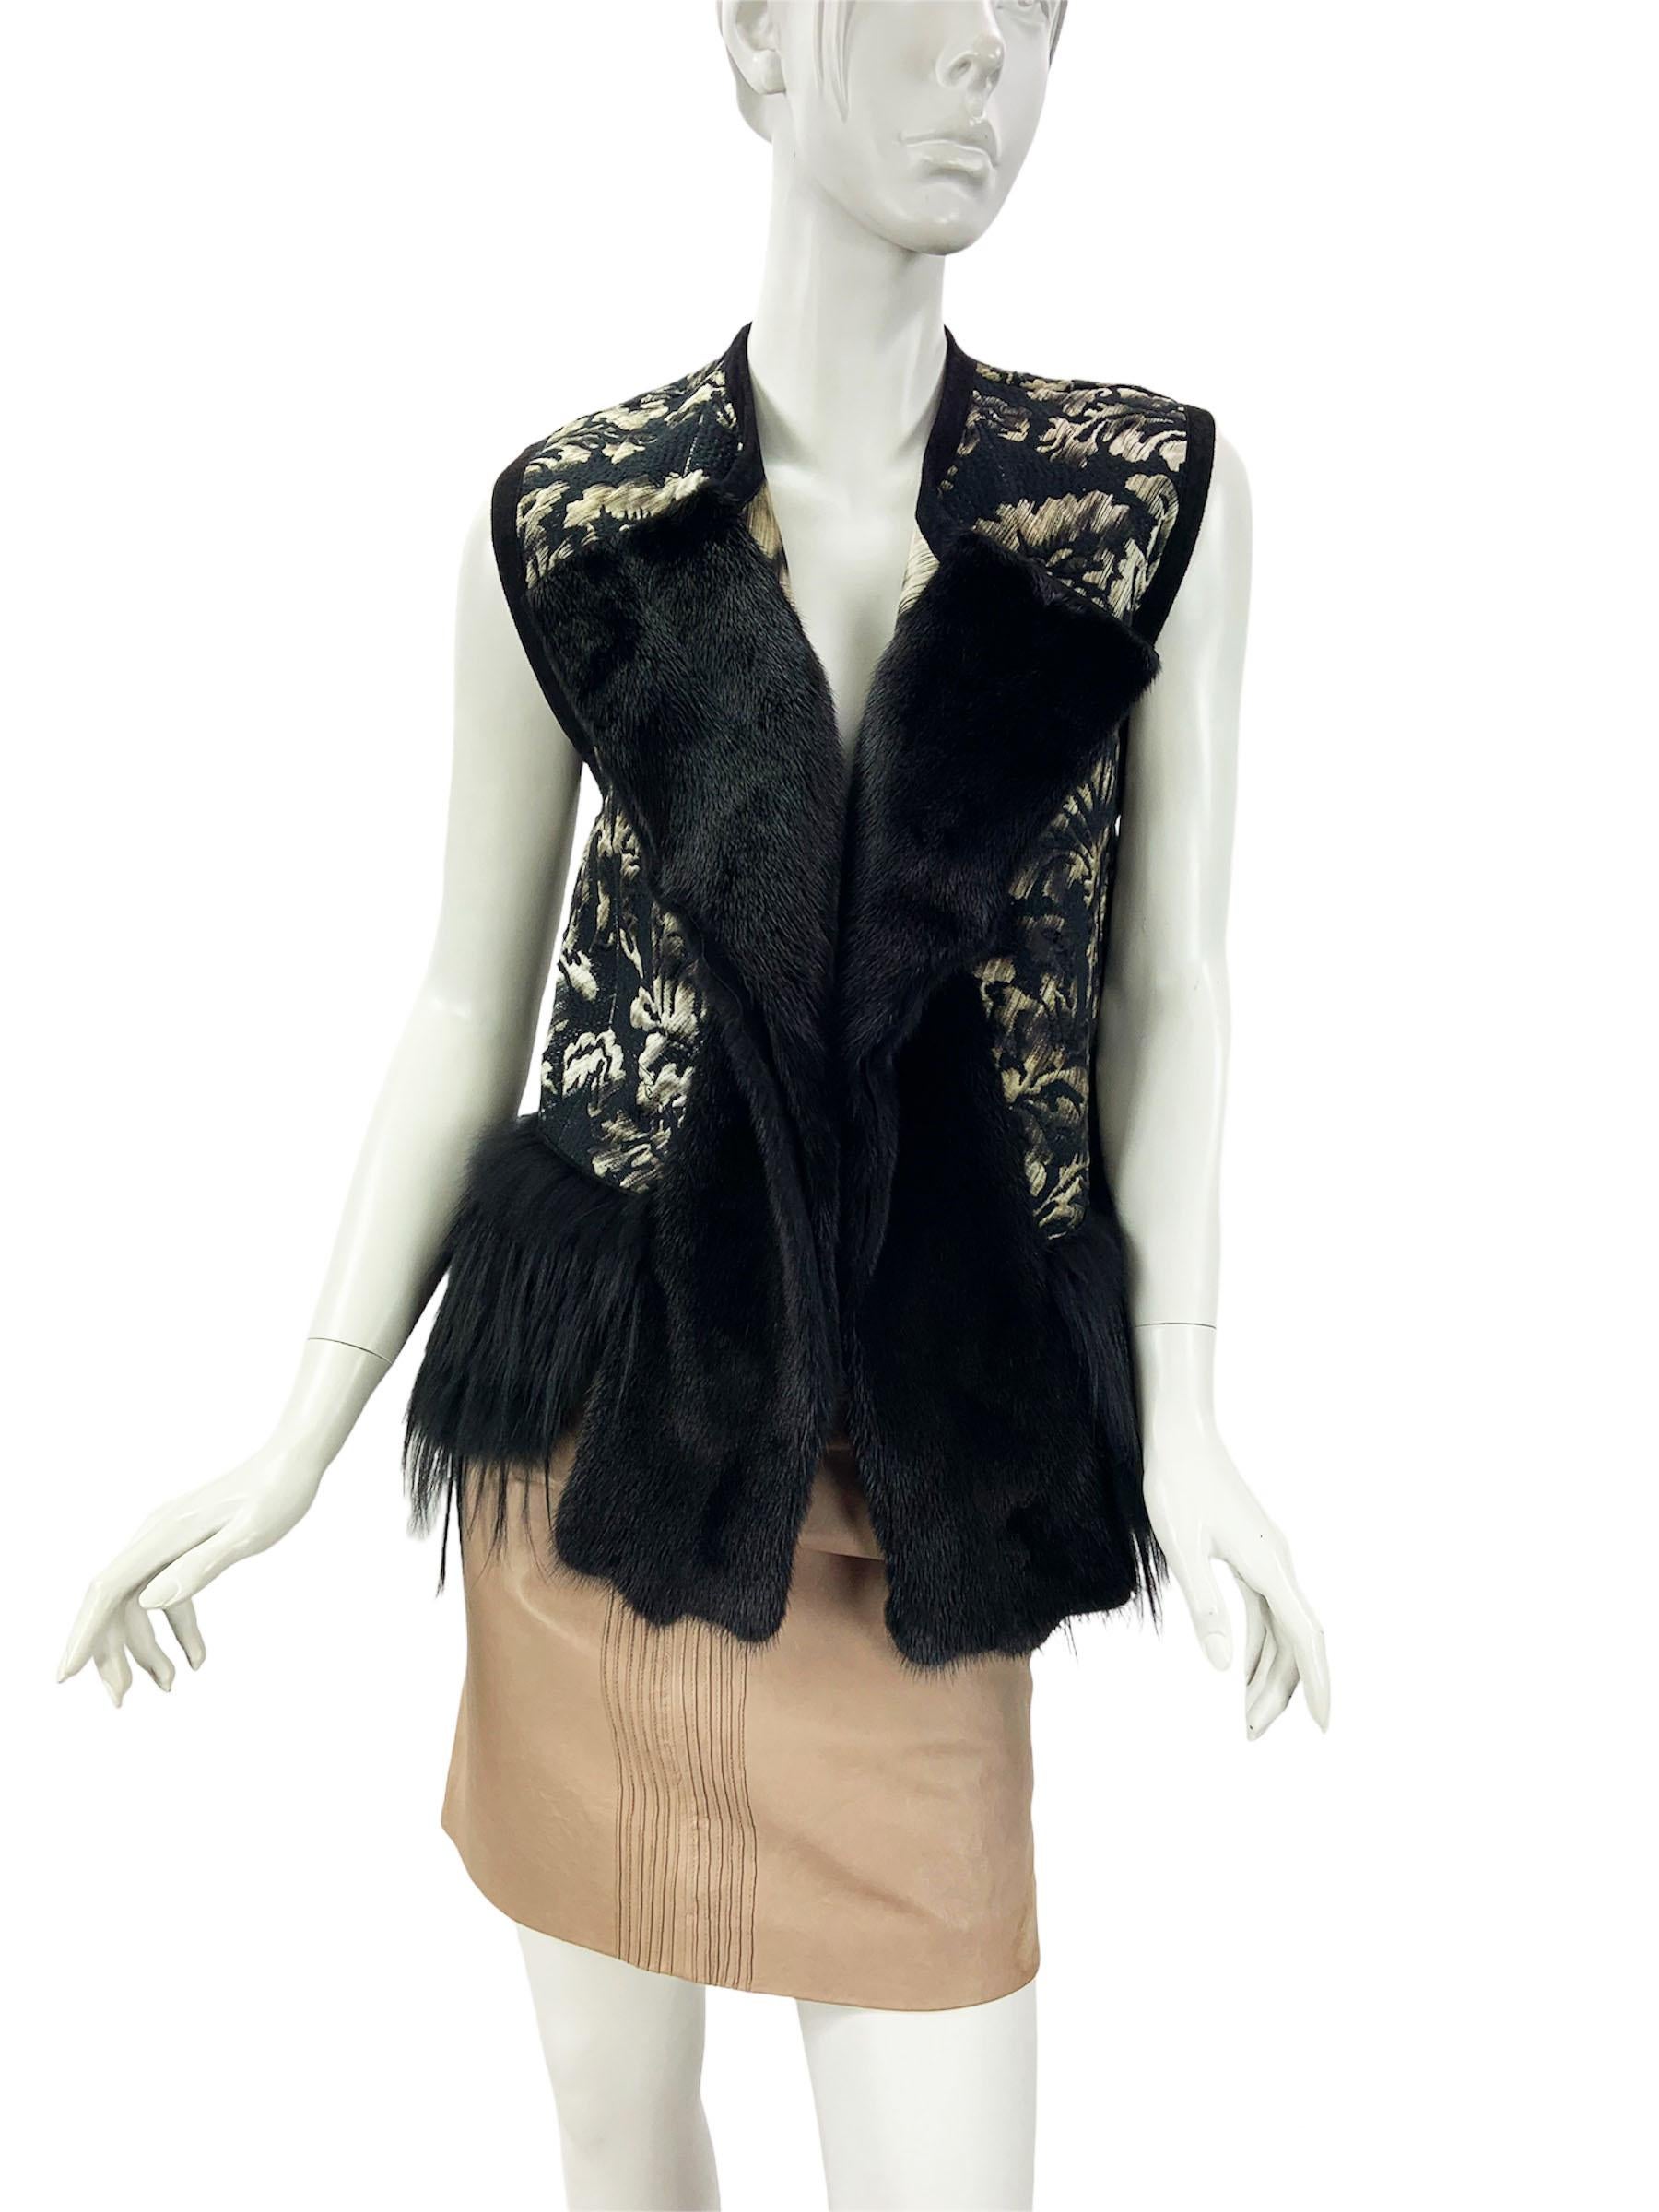 New Roberto Cavalli Fur Silk Vest
Italian size - 44 ( please check measurements).
91 % Mink, 8% Fox, 1% Goatskin. 100% Silk. Open style. 
Measurements: Length - 23 inches ( include fur ), Armpit to armpit - 30 inches.
Made in Italy. 
New without